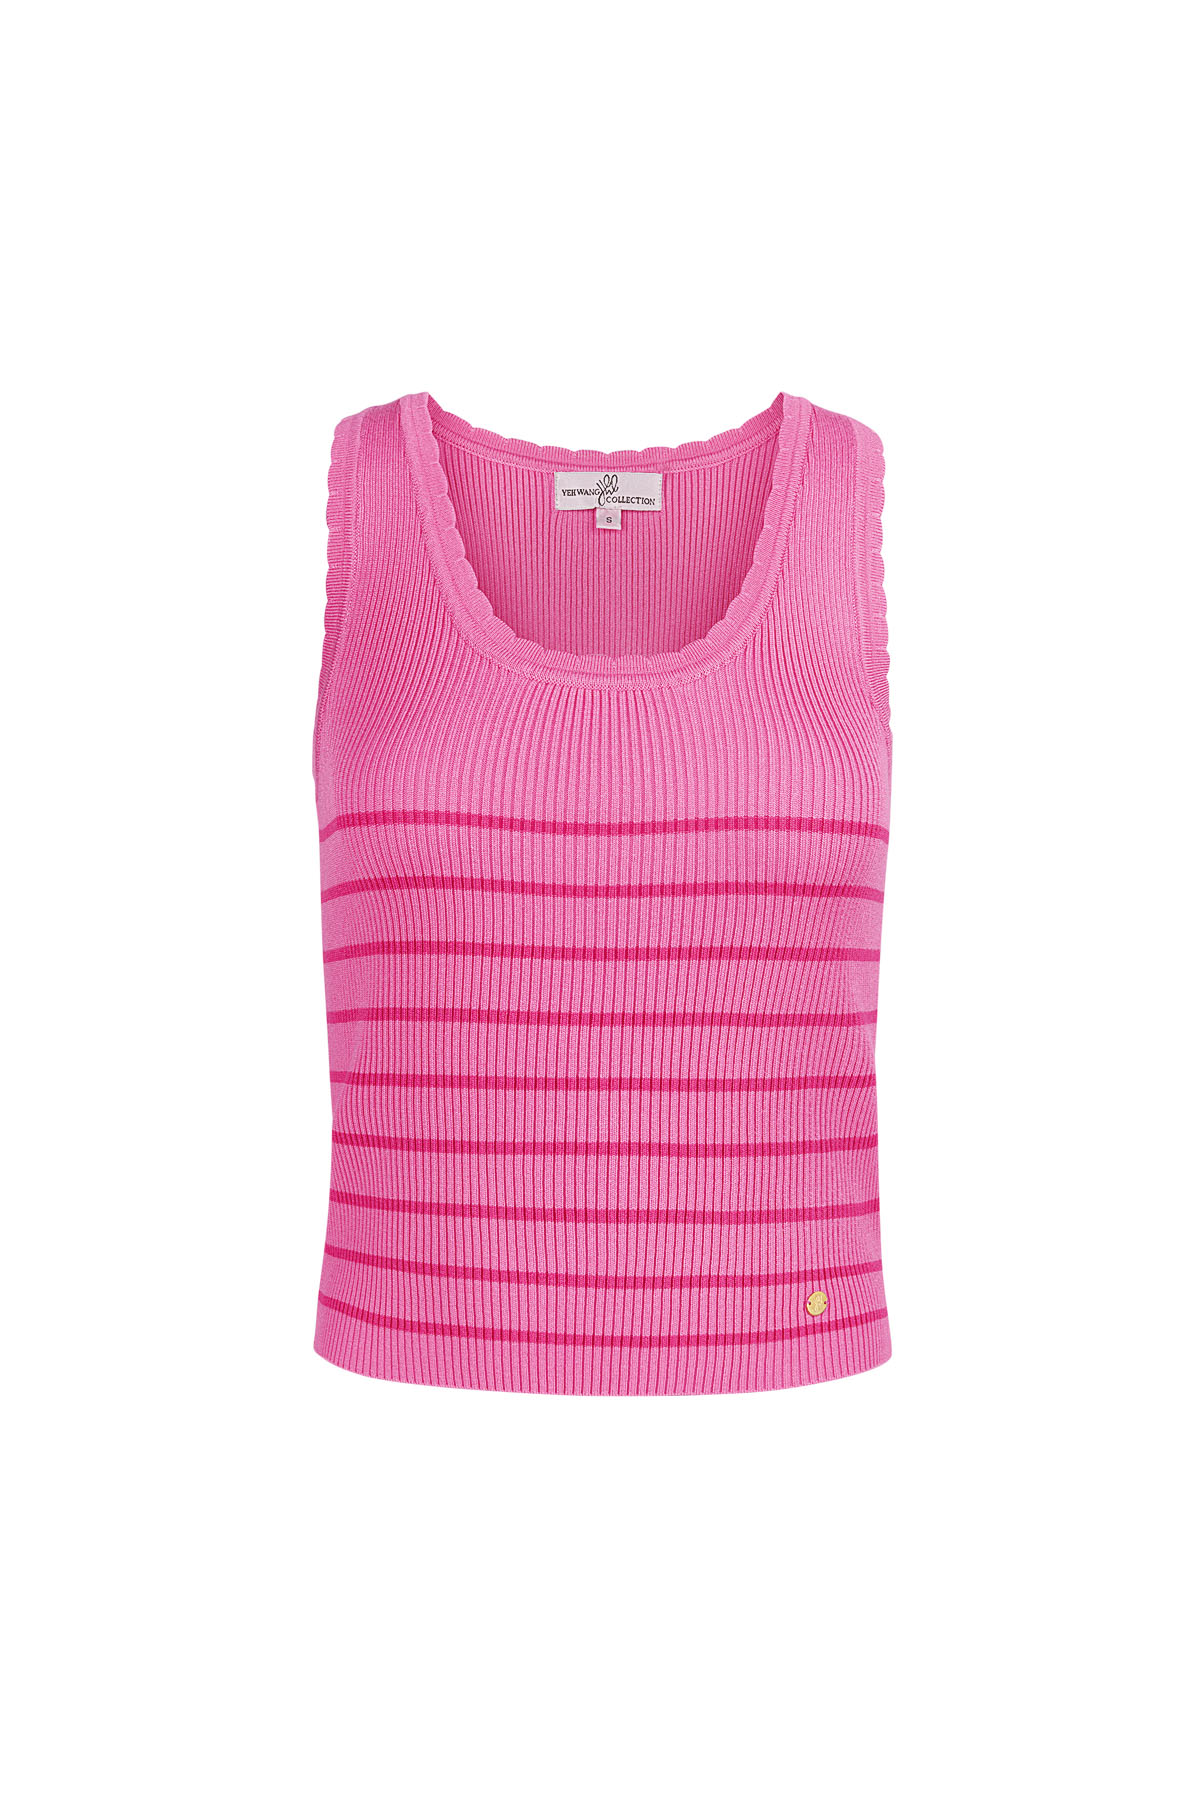 Striped, sleeveless top with classic edge large – pink h5 